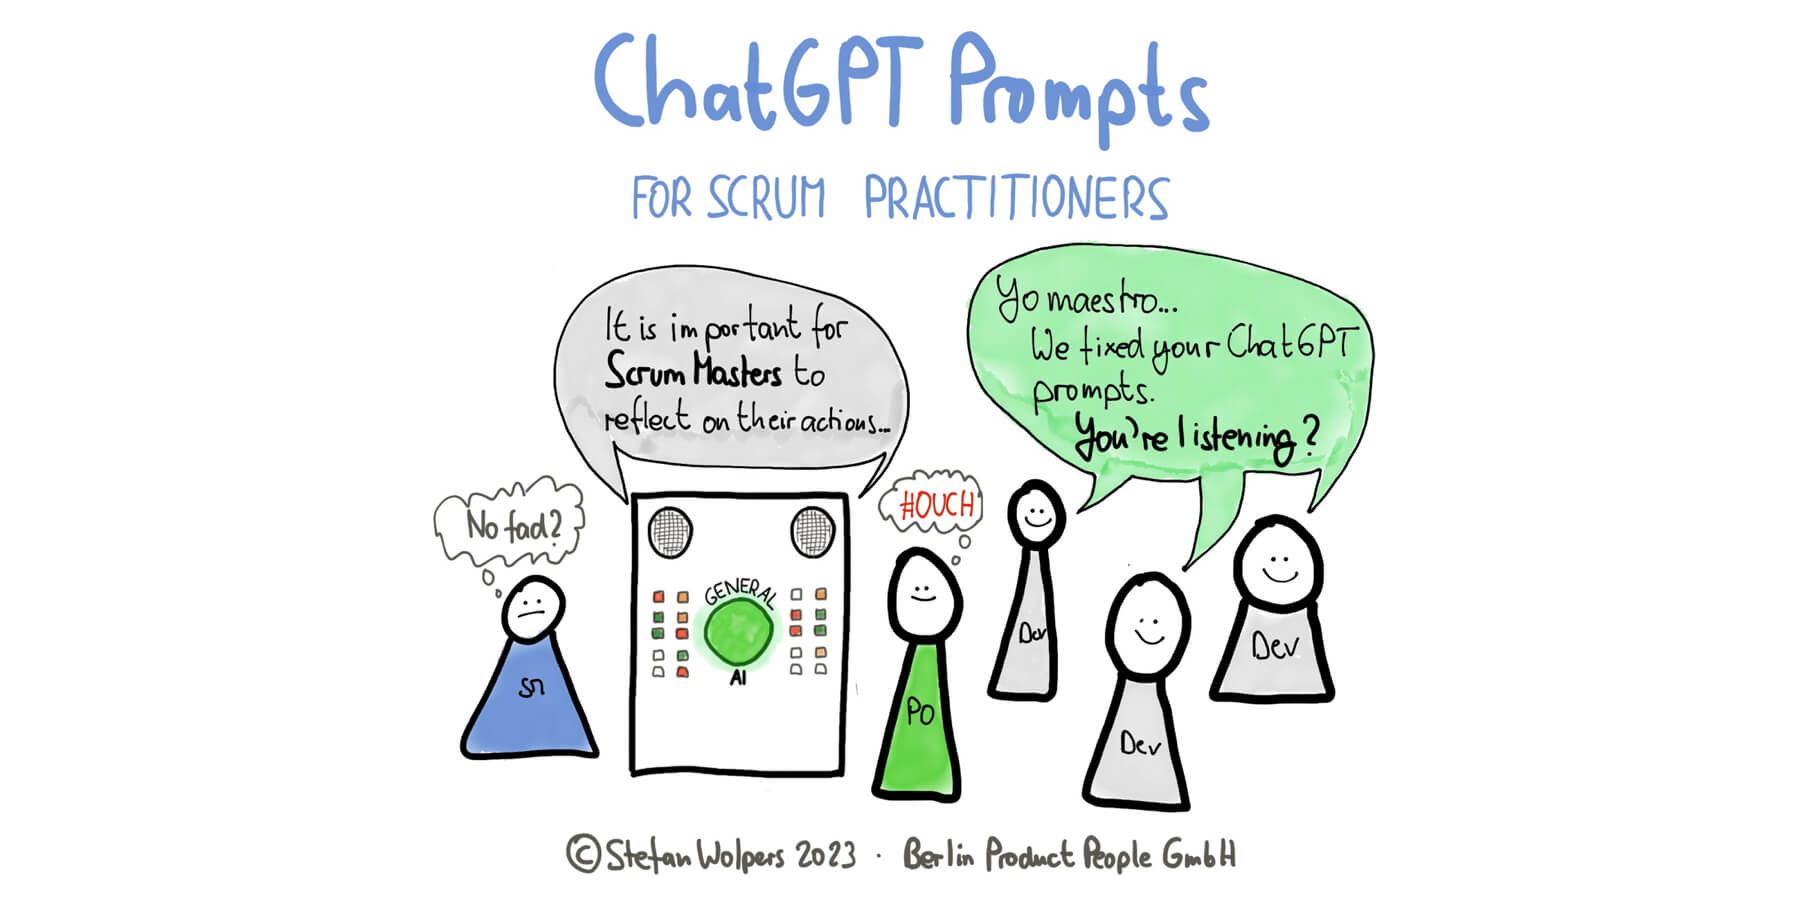 ChatGPT-Prompts für Scrum Master, Product Owner und Entwickler — Berlin-Product-People.com